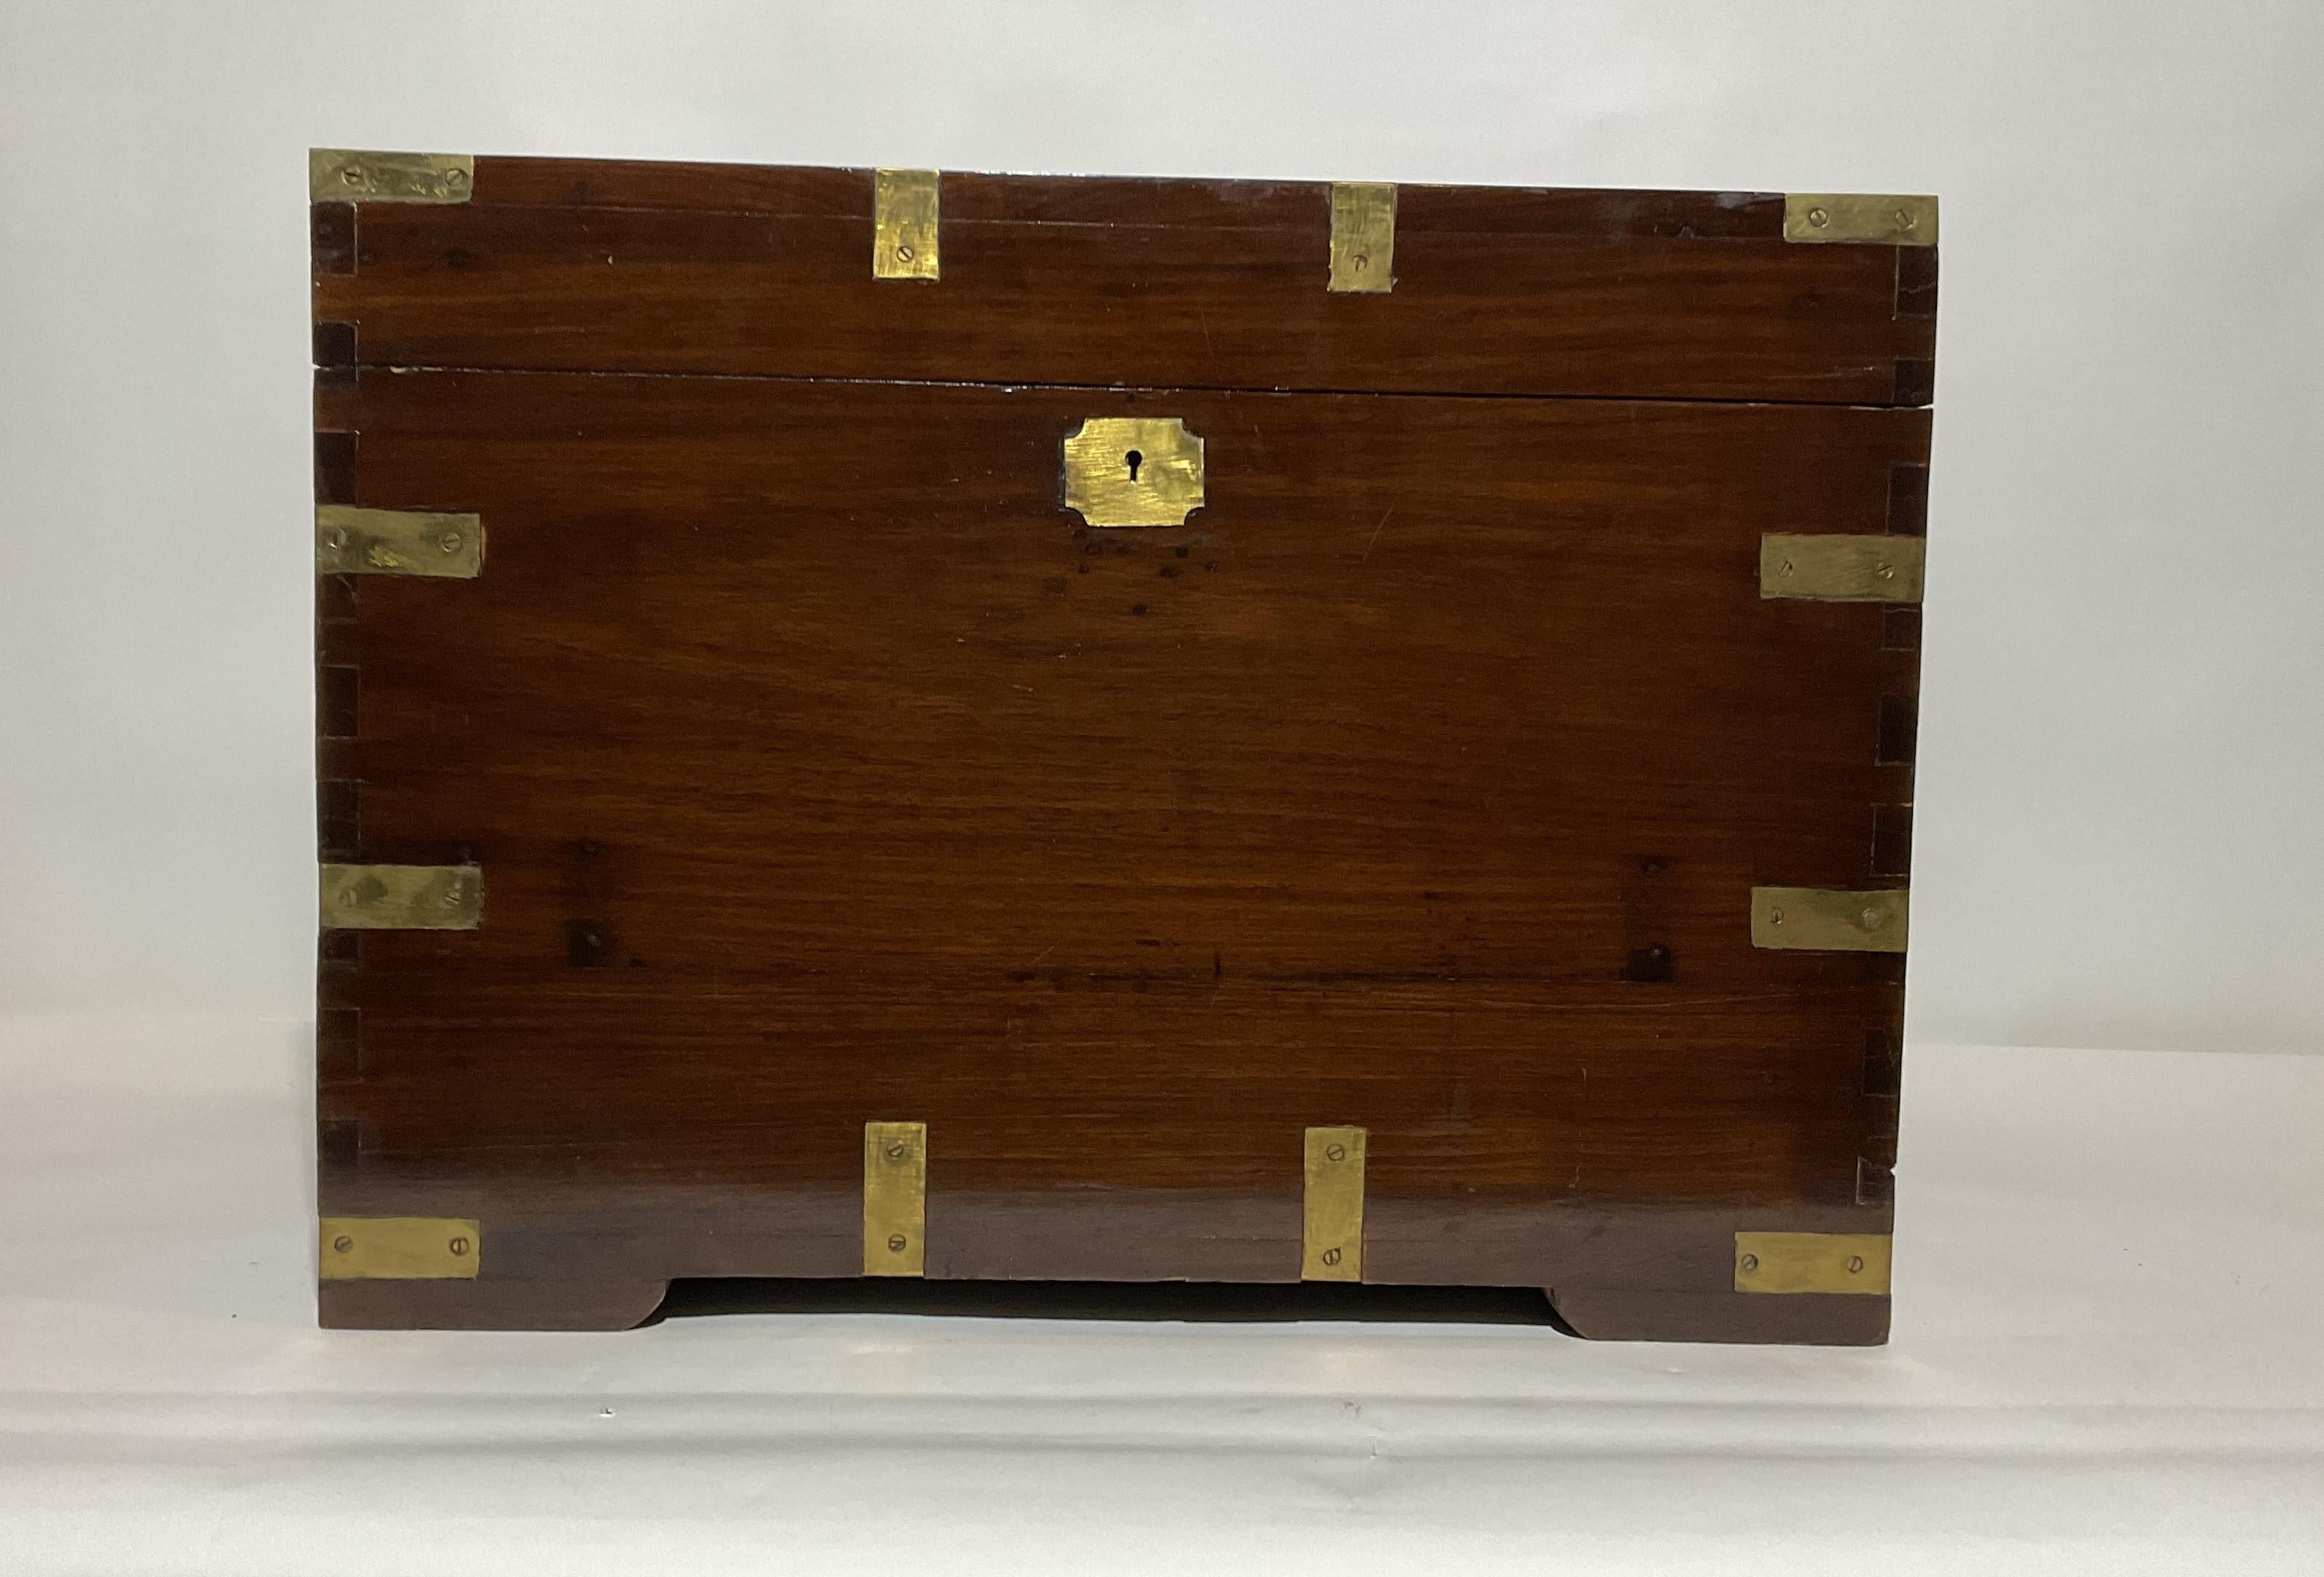 Teak and Brass nautical chest with inlaid brass corners, inlaid keyhole brass, carry handles, corners. etc.,

Weight: 36 lbs.
Overall Dimensions: 17